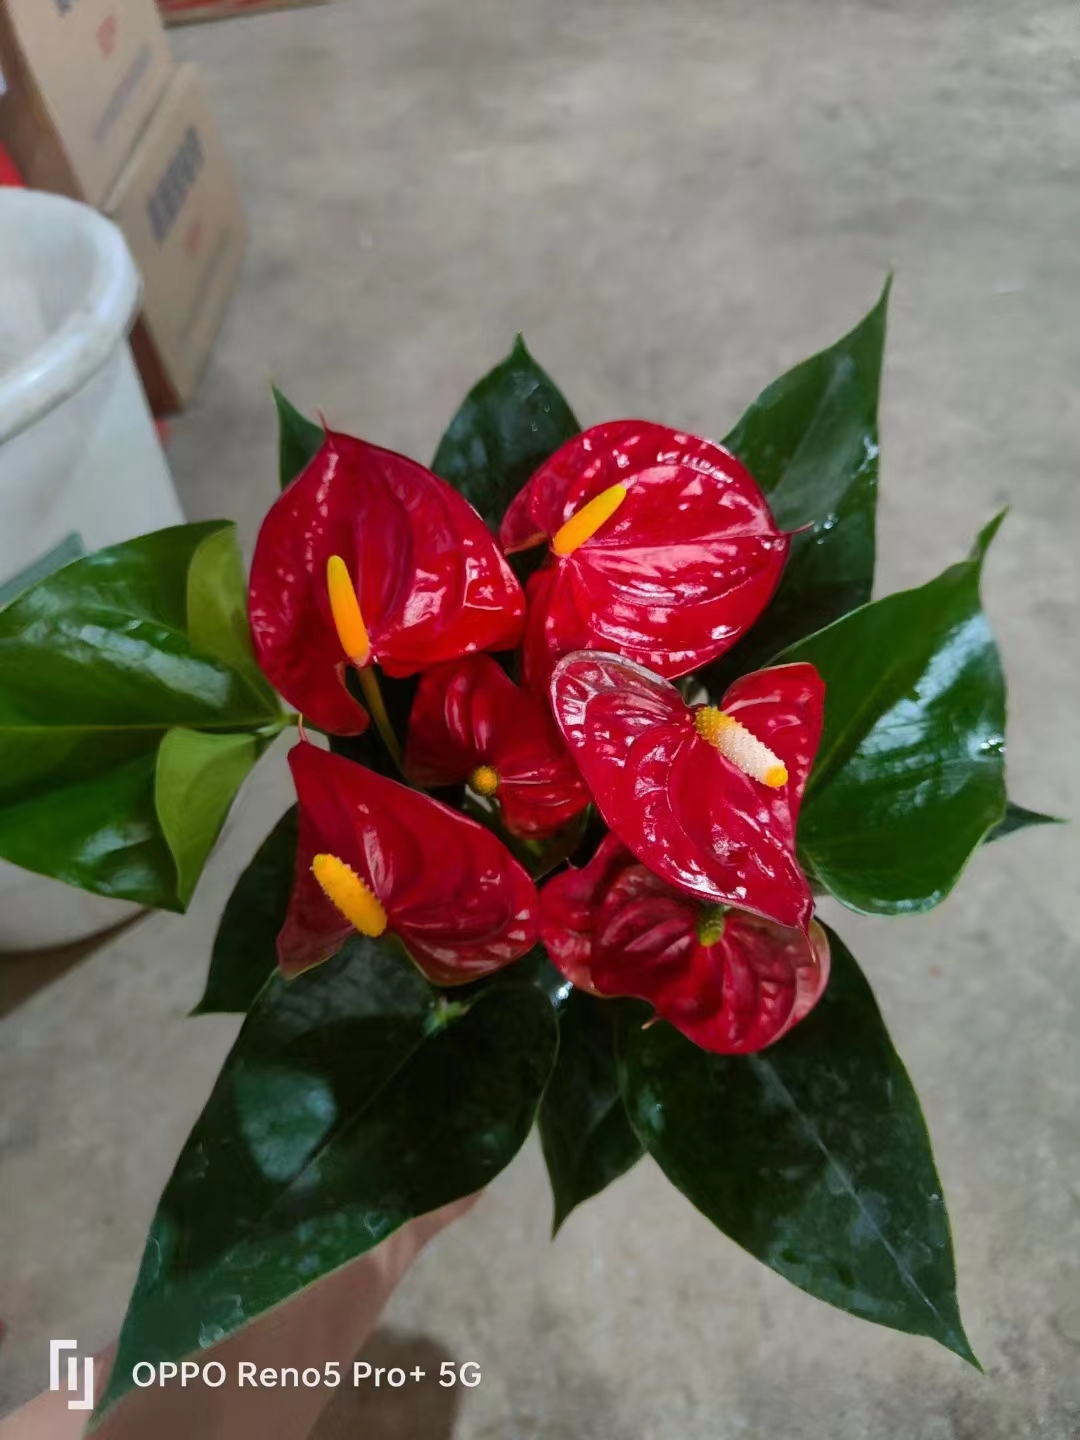 China Good Quality & Price Anthurium With Differnent Varieties